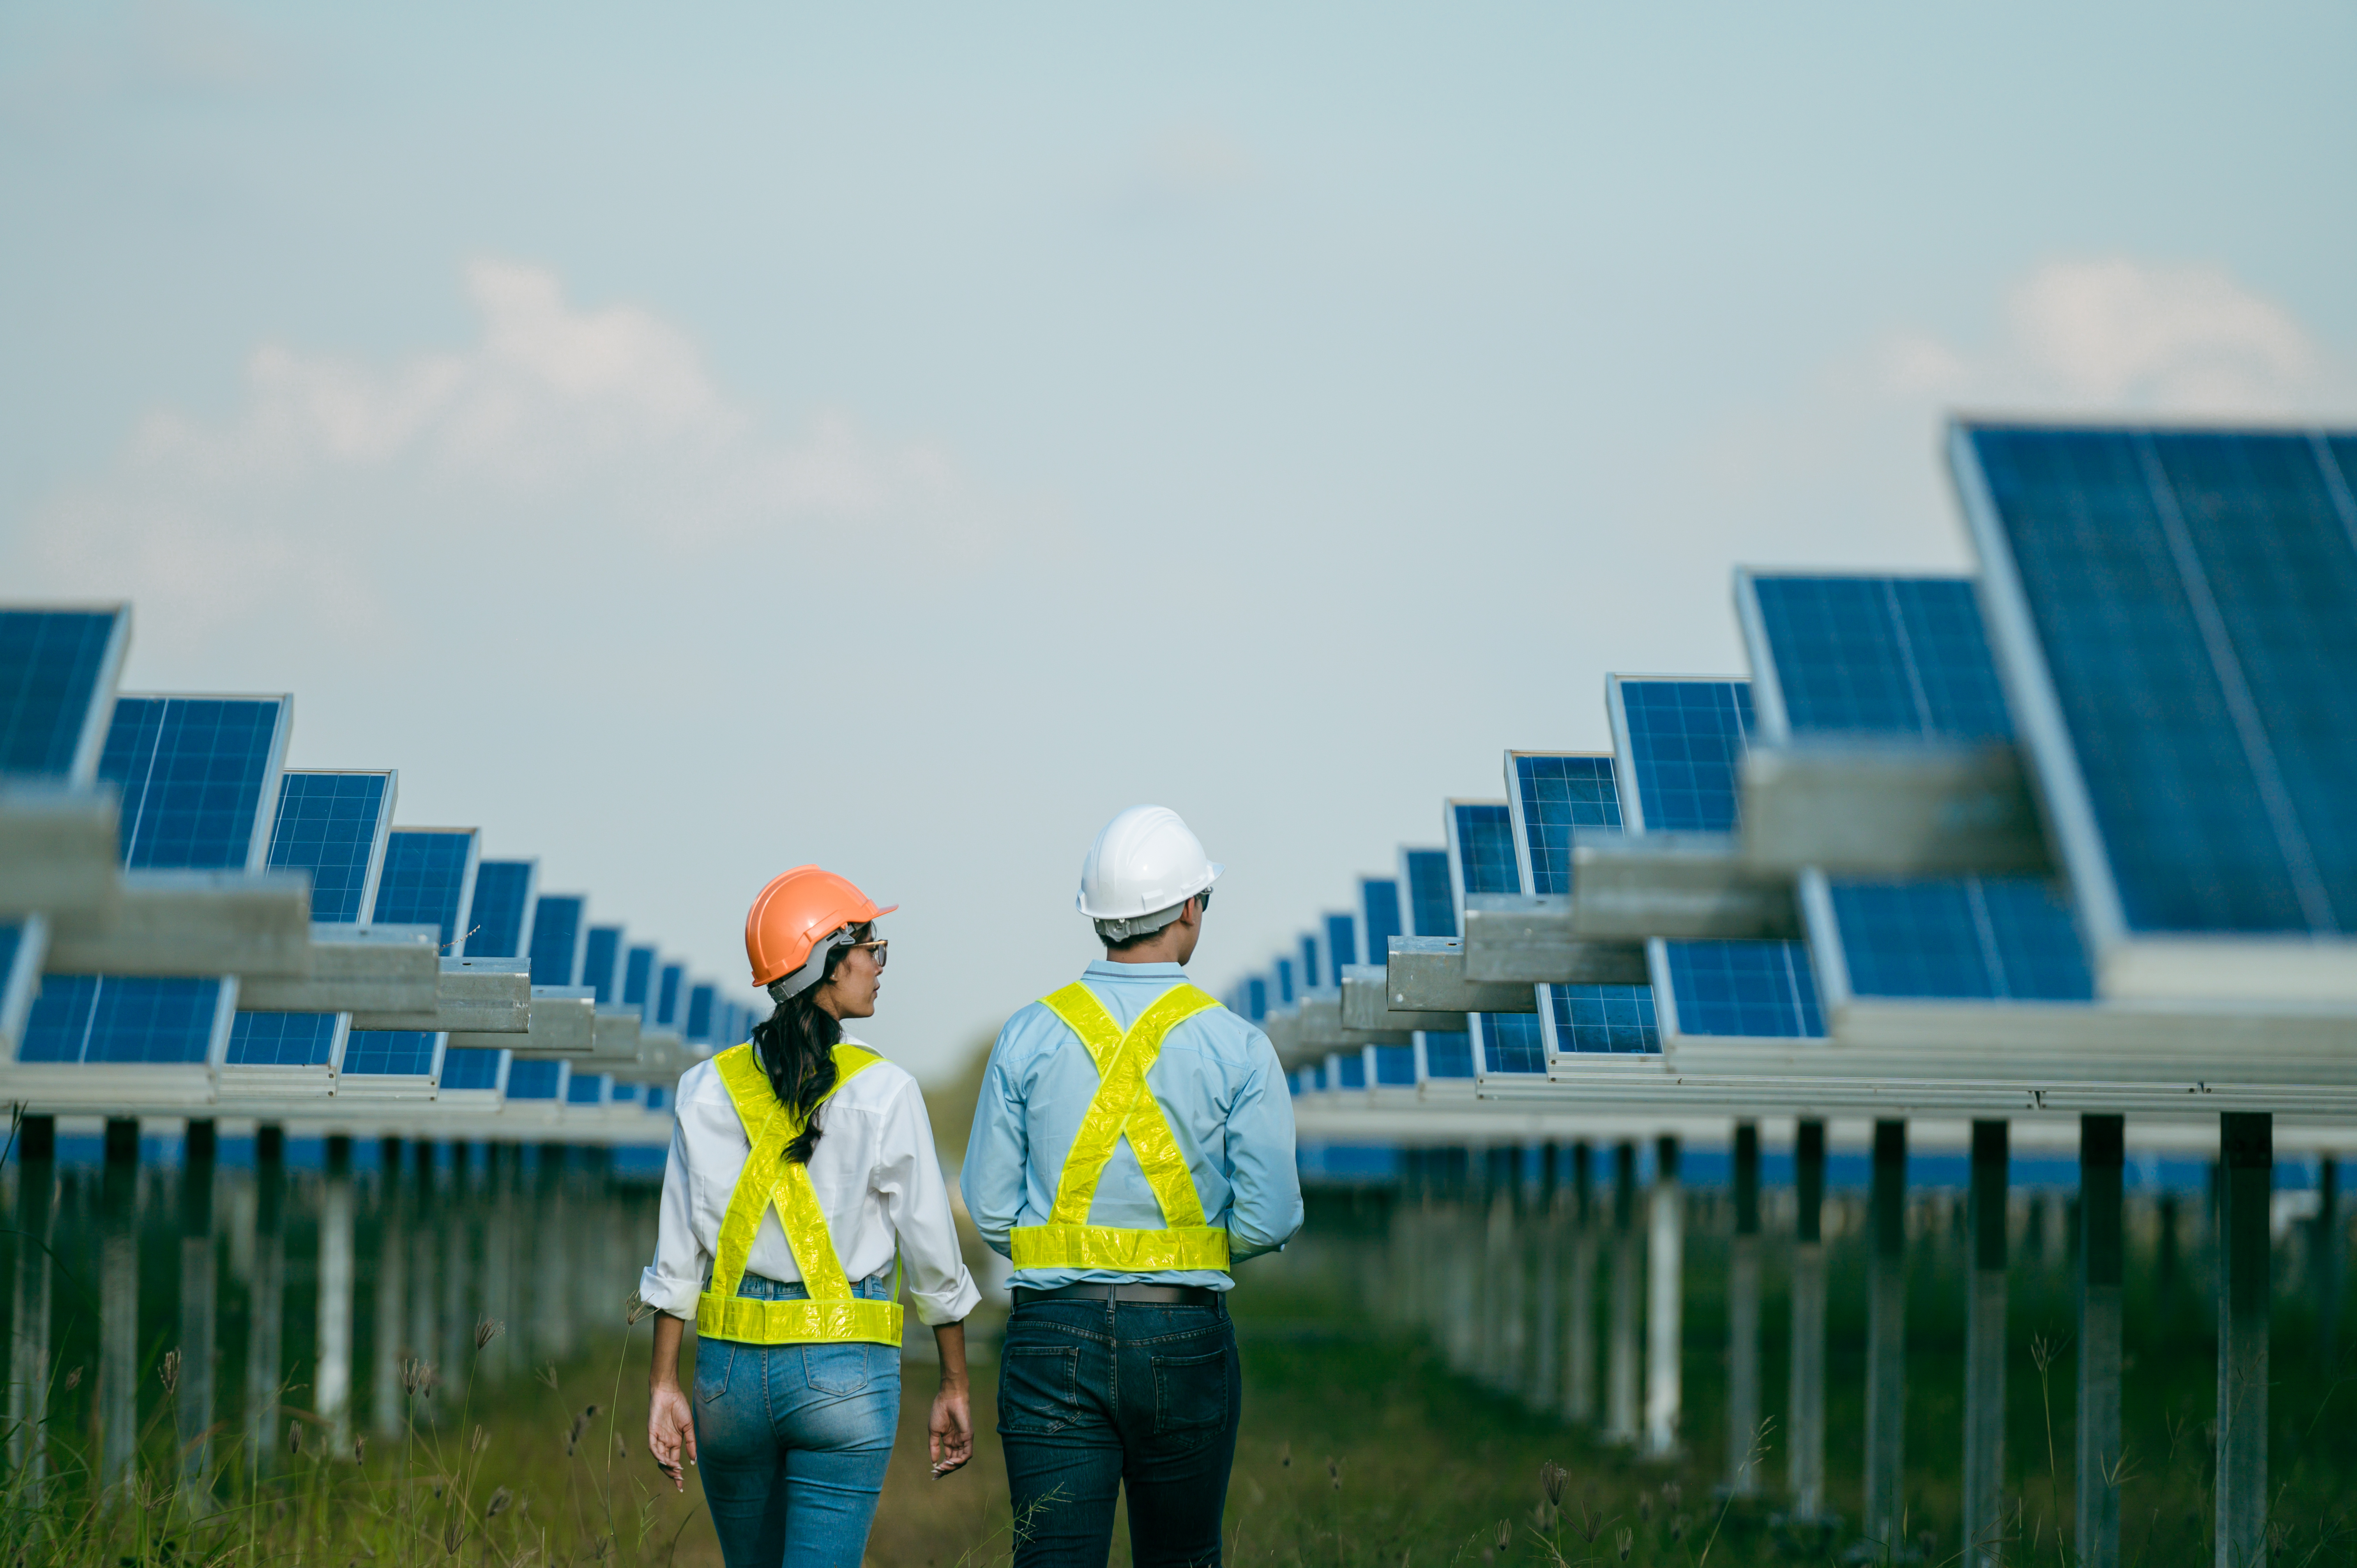 Green field with solar panels, a woman and man walk between them